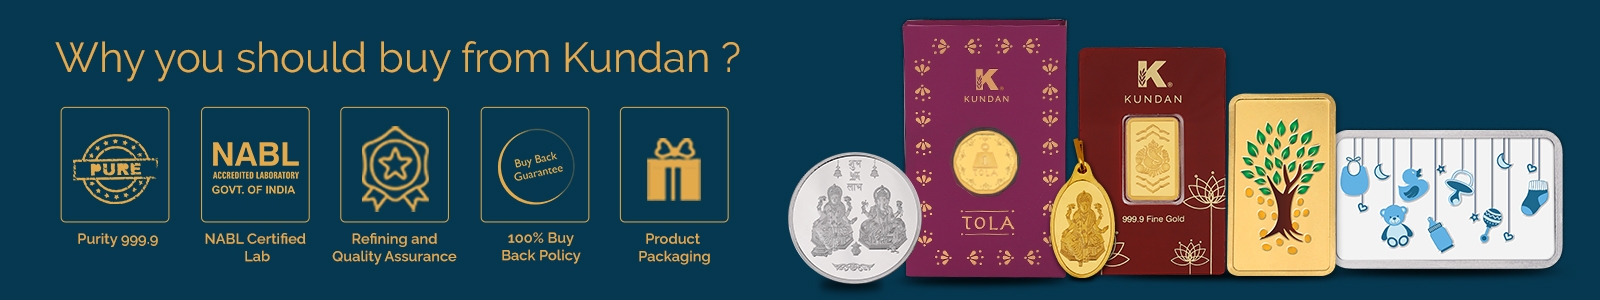 Why you should buy from Kundan?